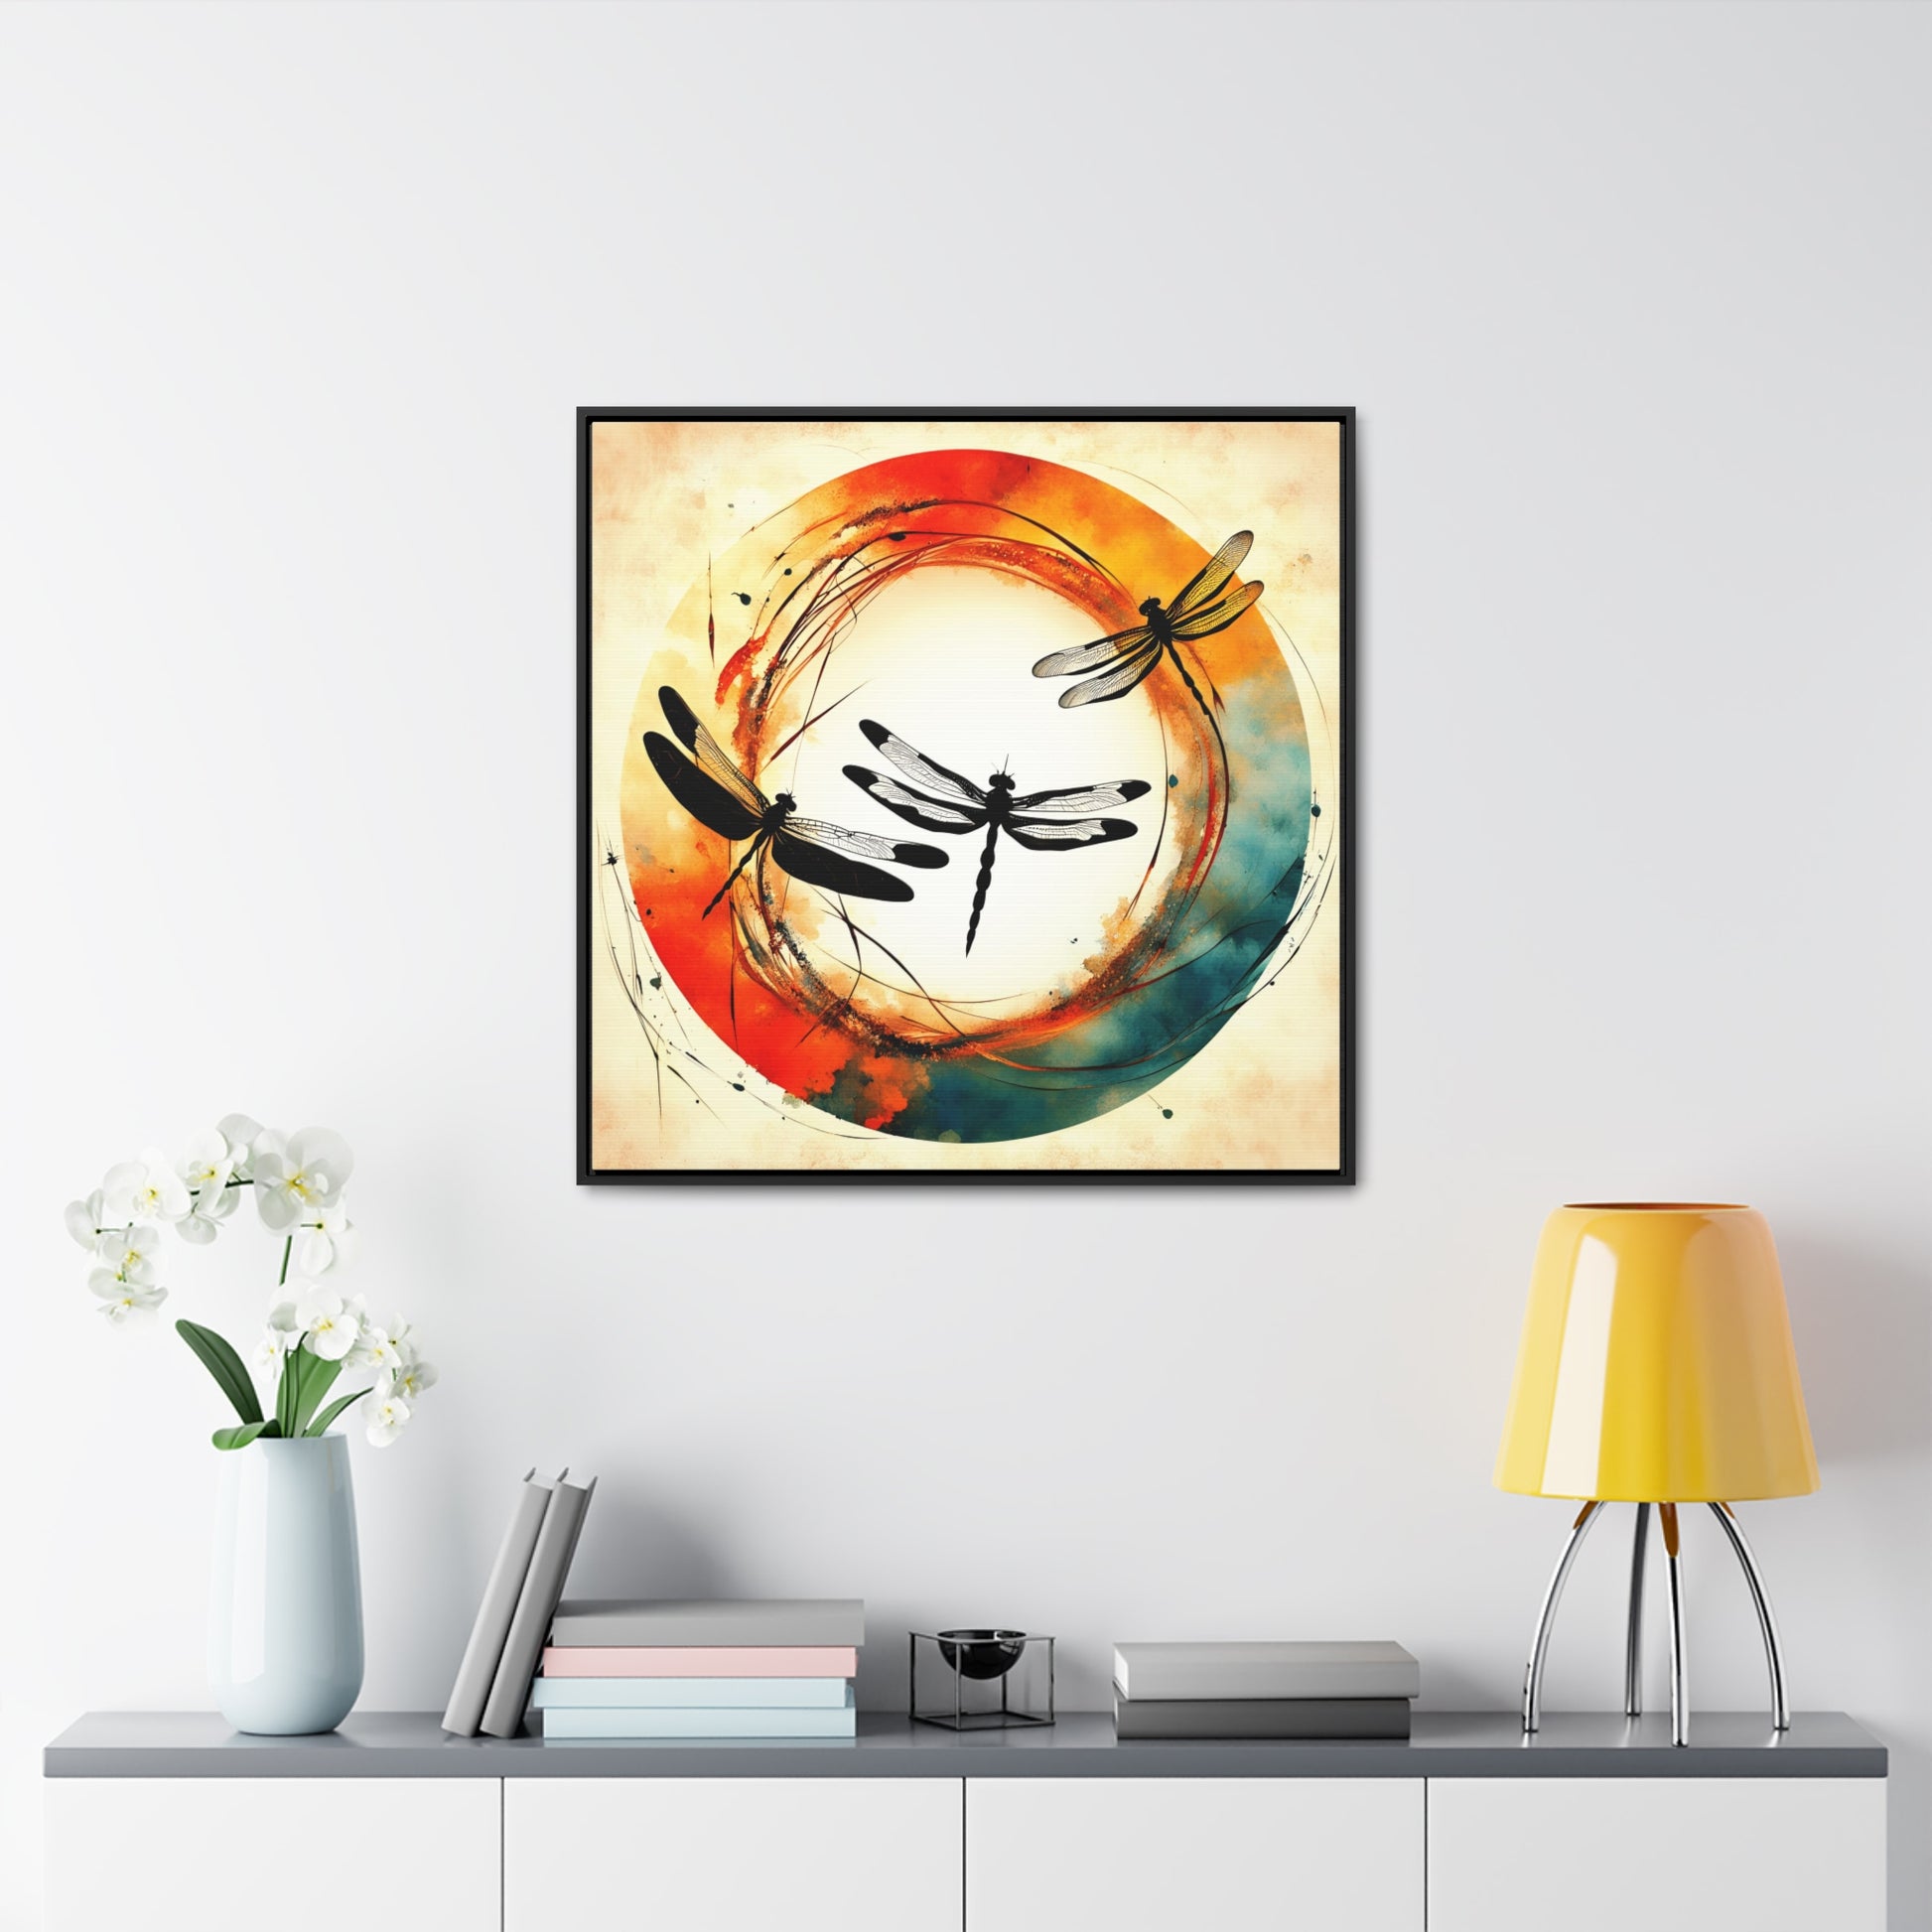 Dragonflies Silhouettes in a colorful Enso circle Print on Canvas in a Floating Frame 30x30